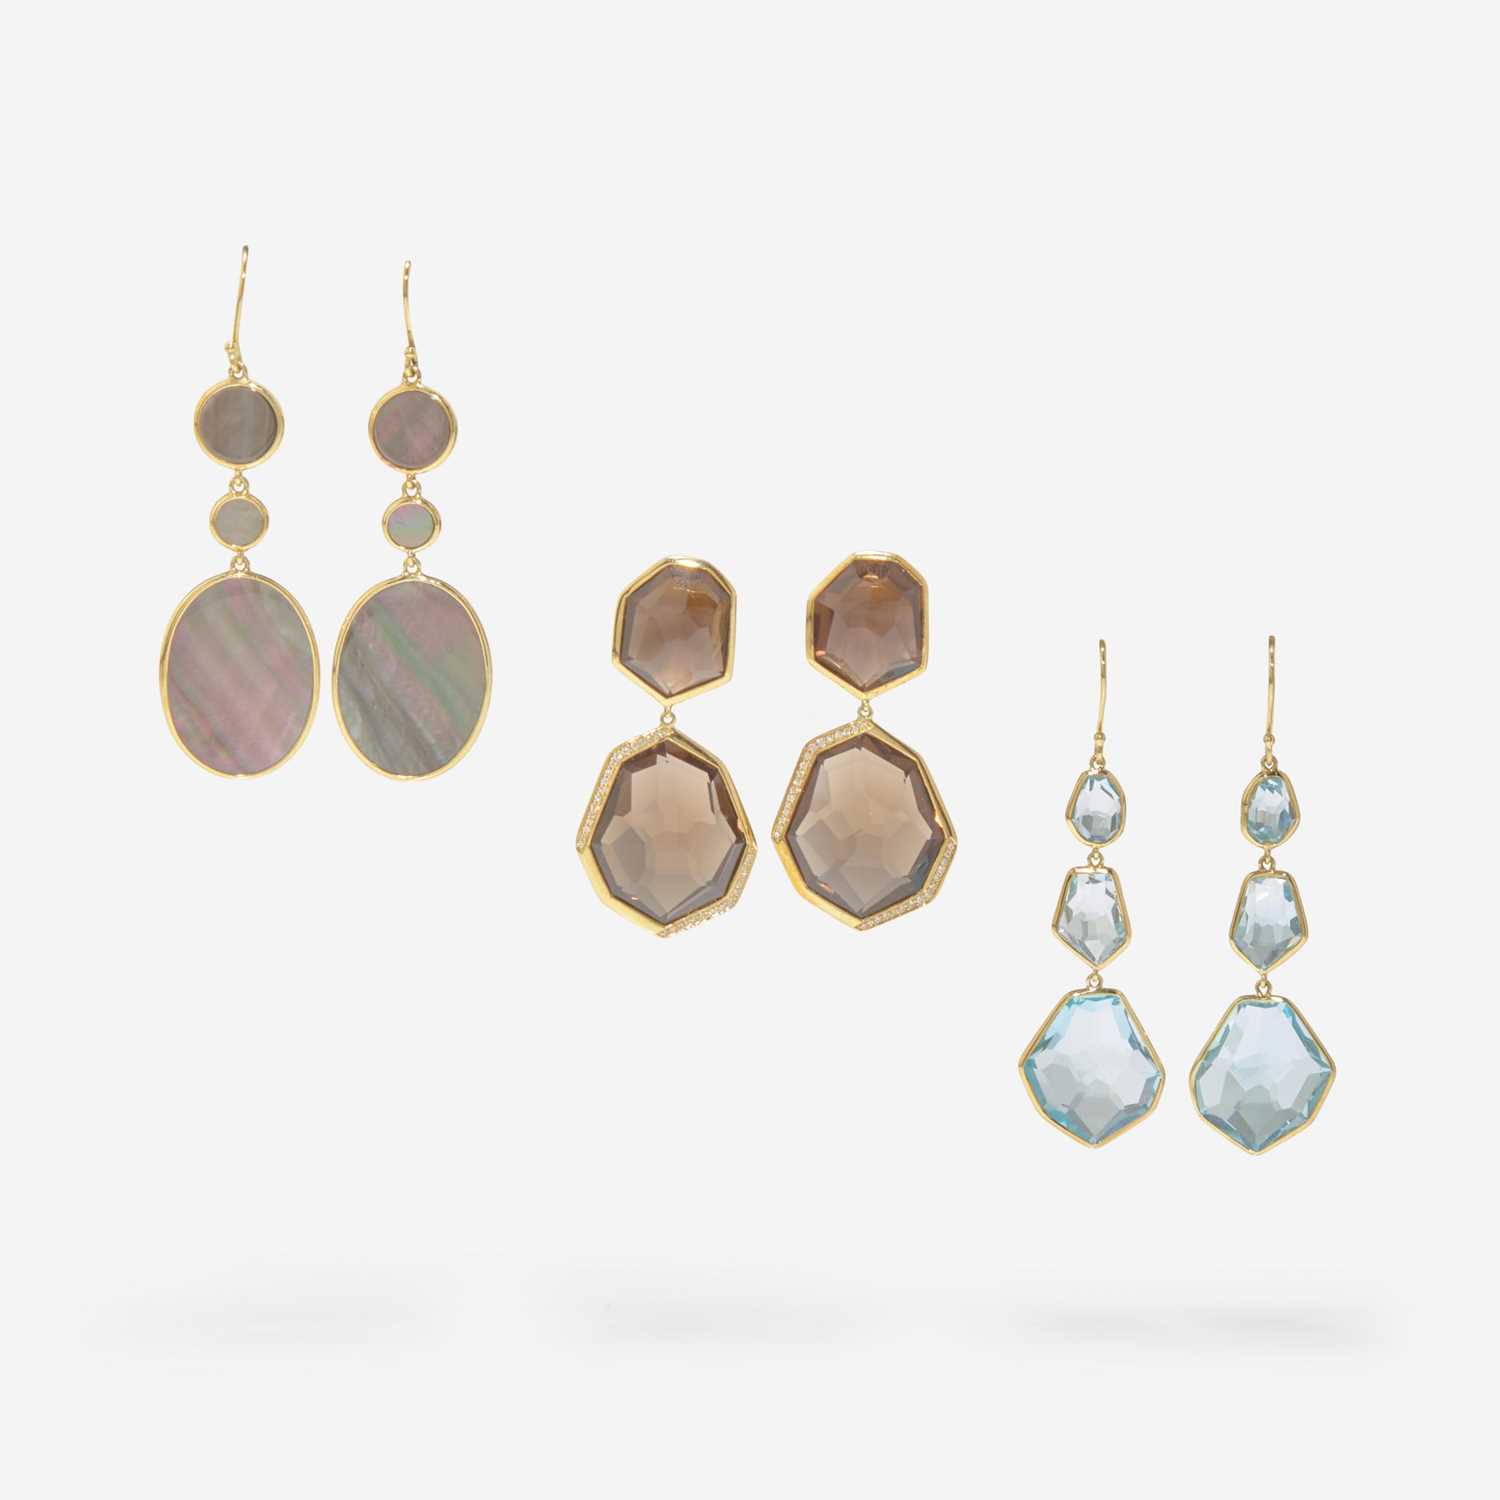 Lot 243 - Collection of Three Sets of Ippolita Gemstone Earrings